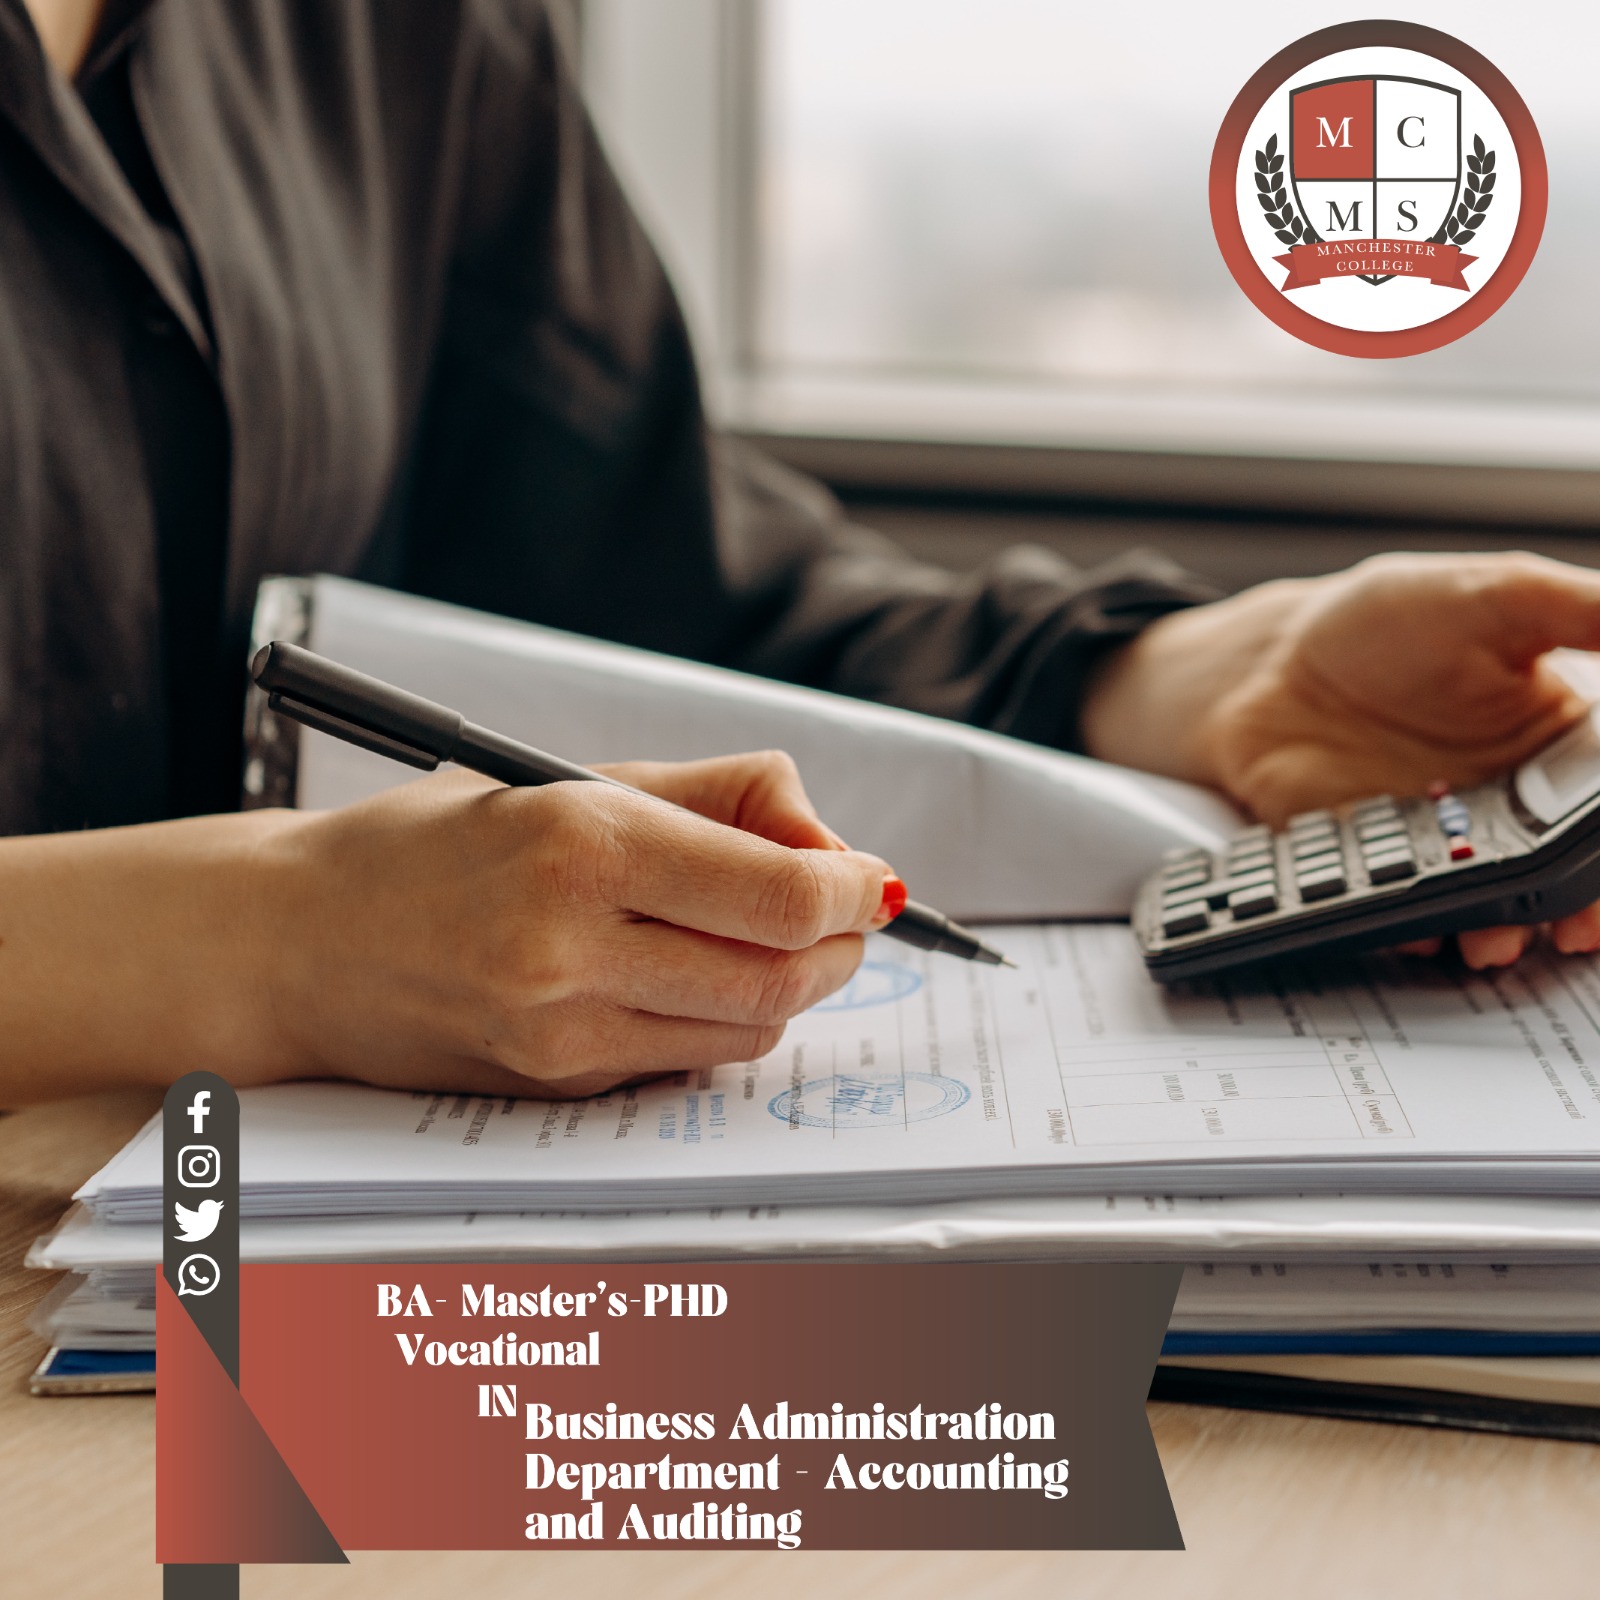 Business Administration Department – Accounting and Auditing